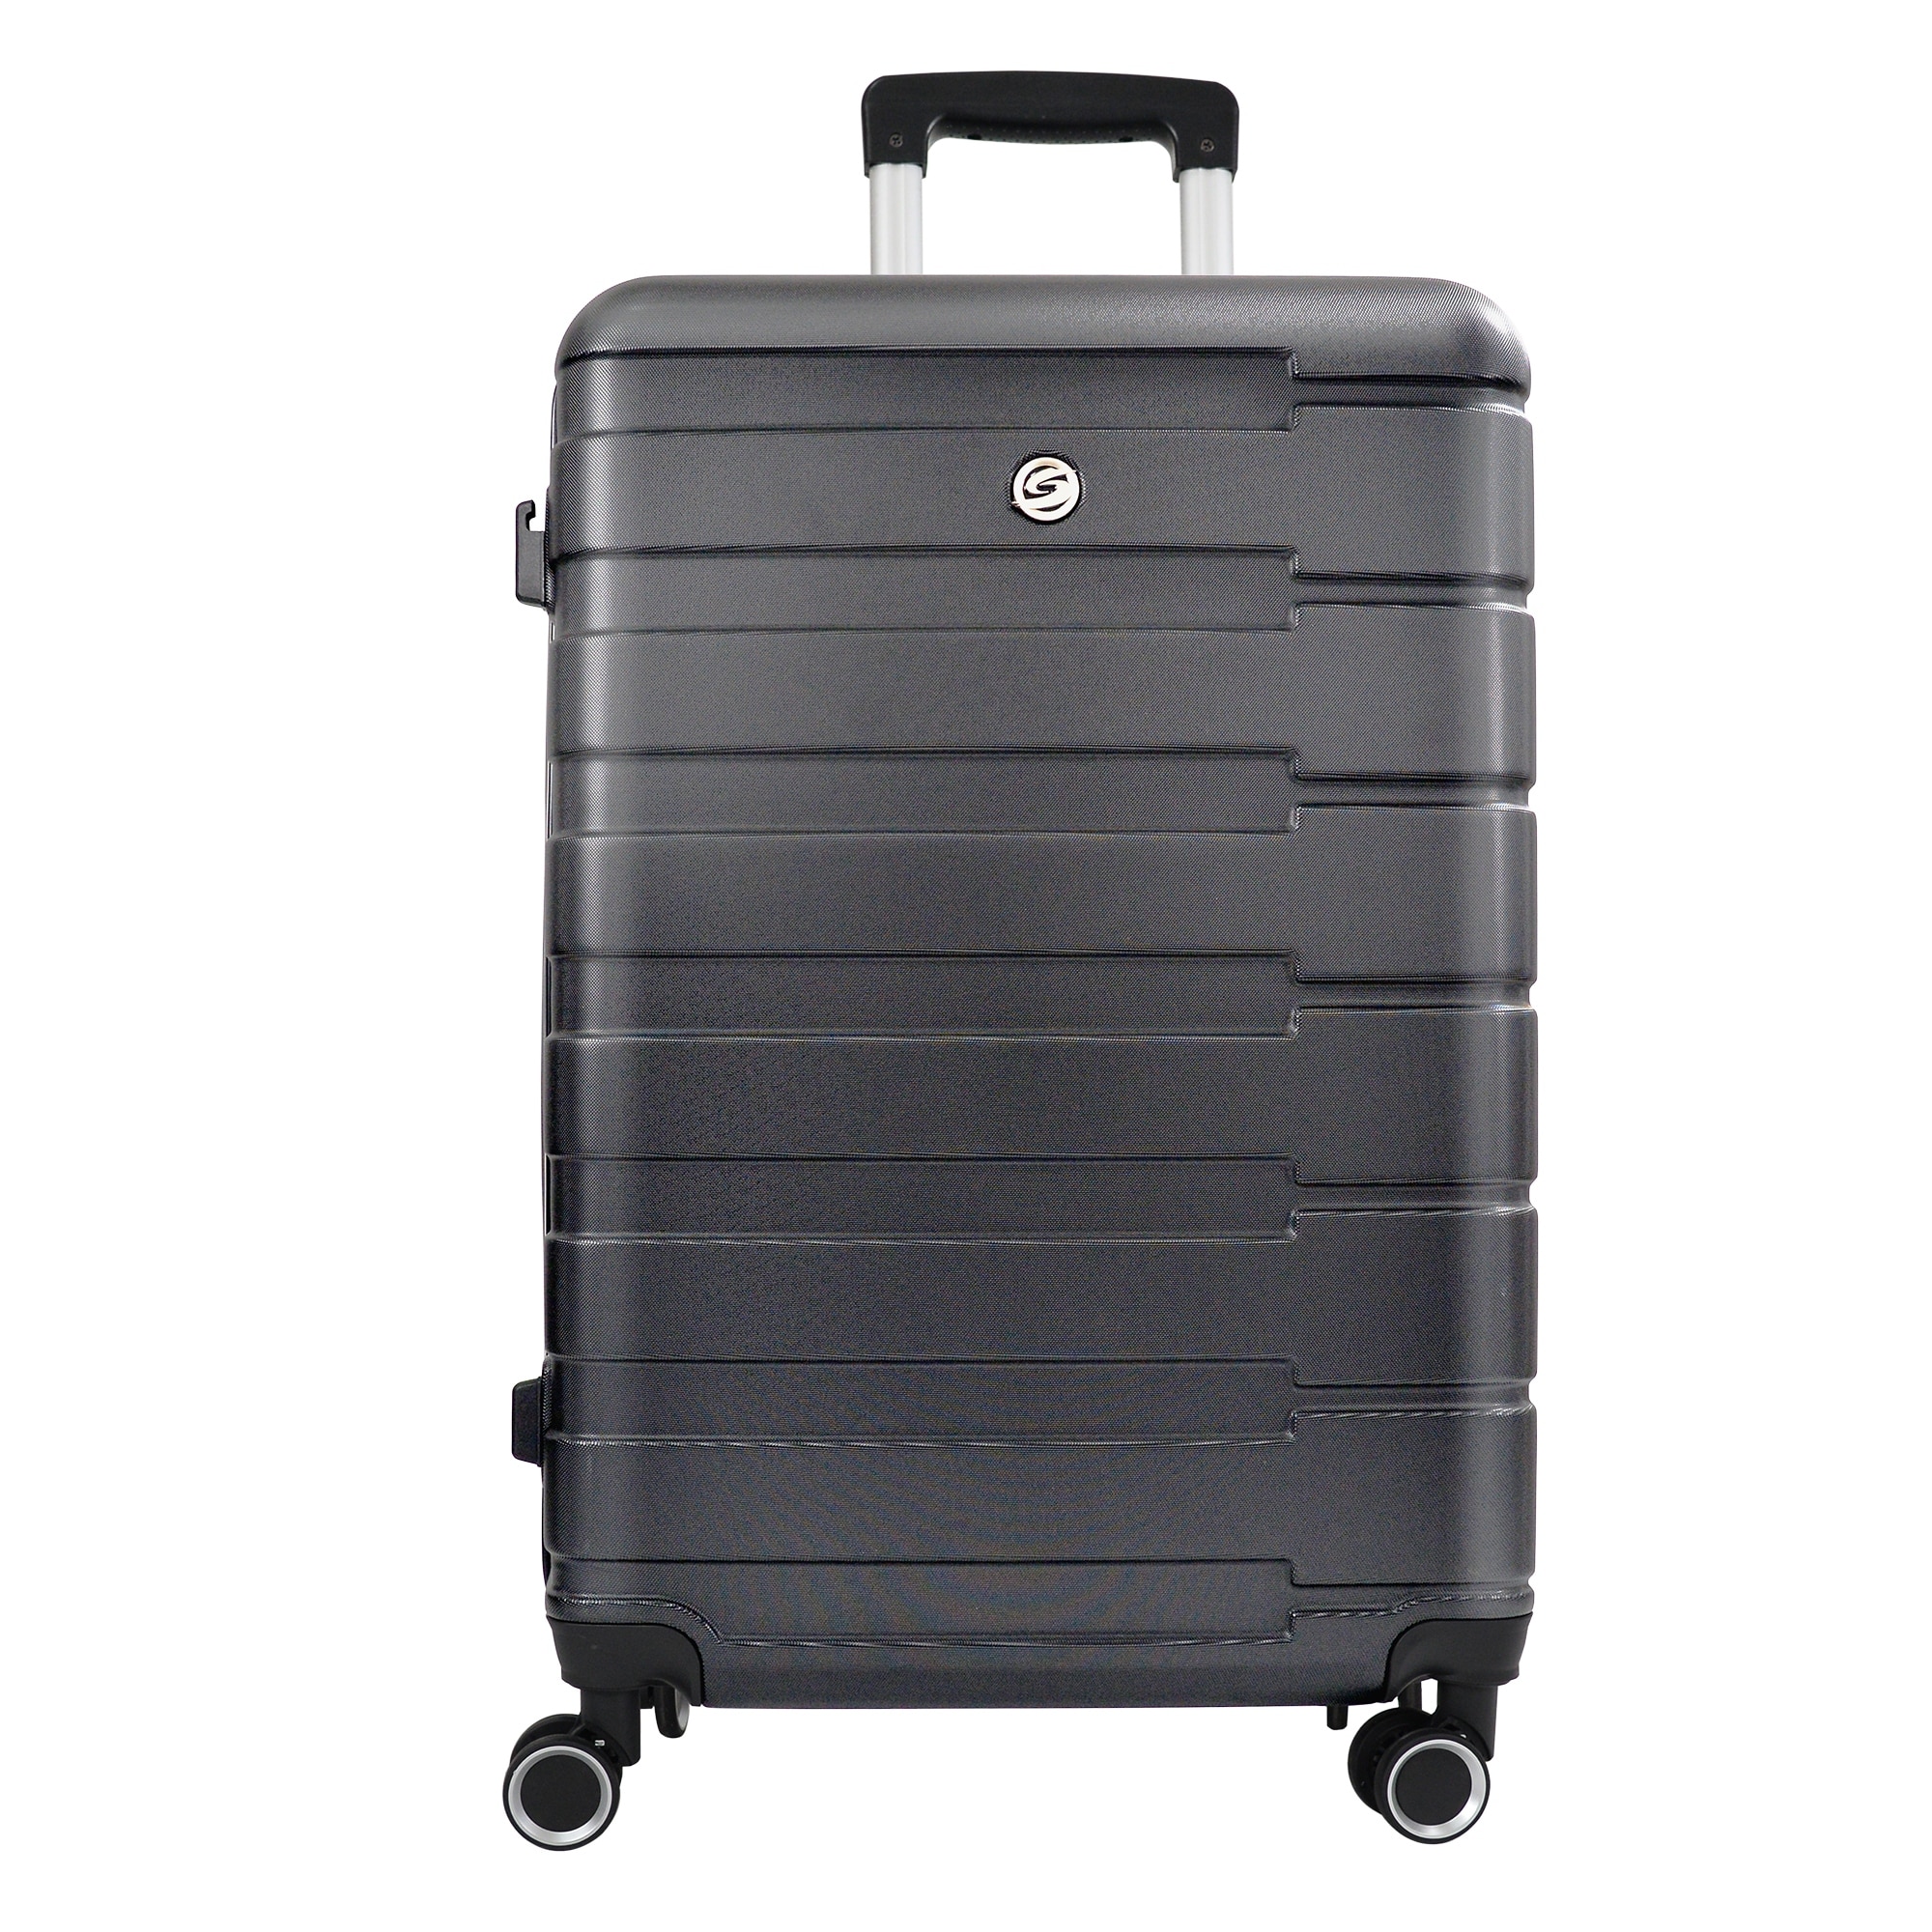 Hard Shell Suitcase Checked luggage, Large Suitcas...